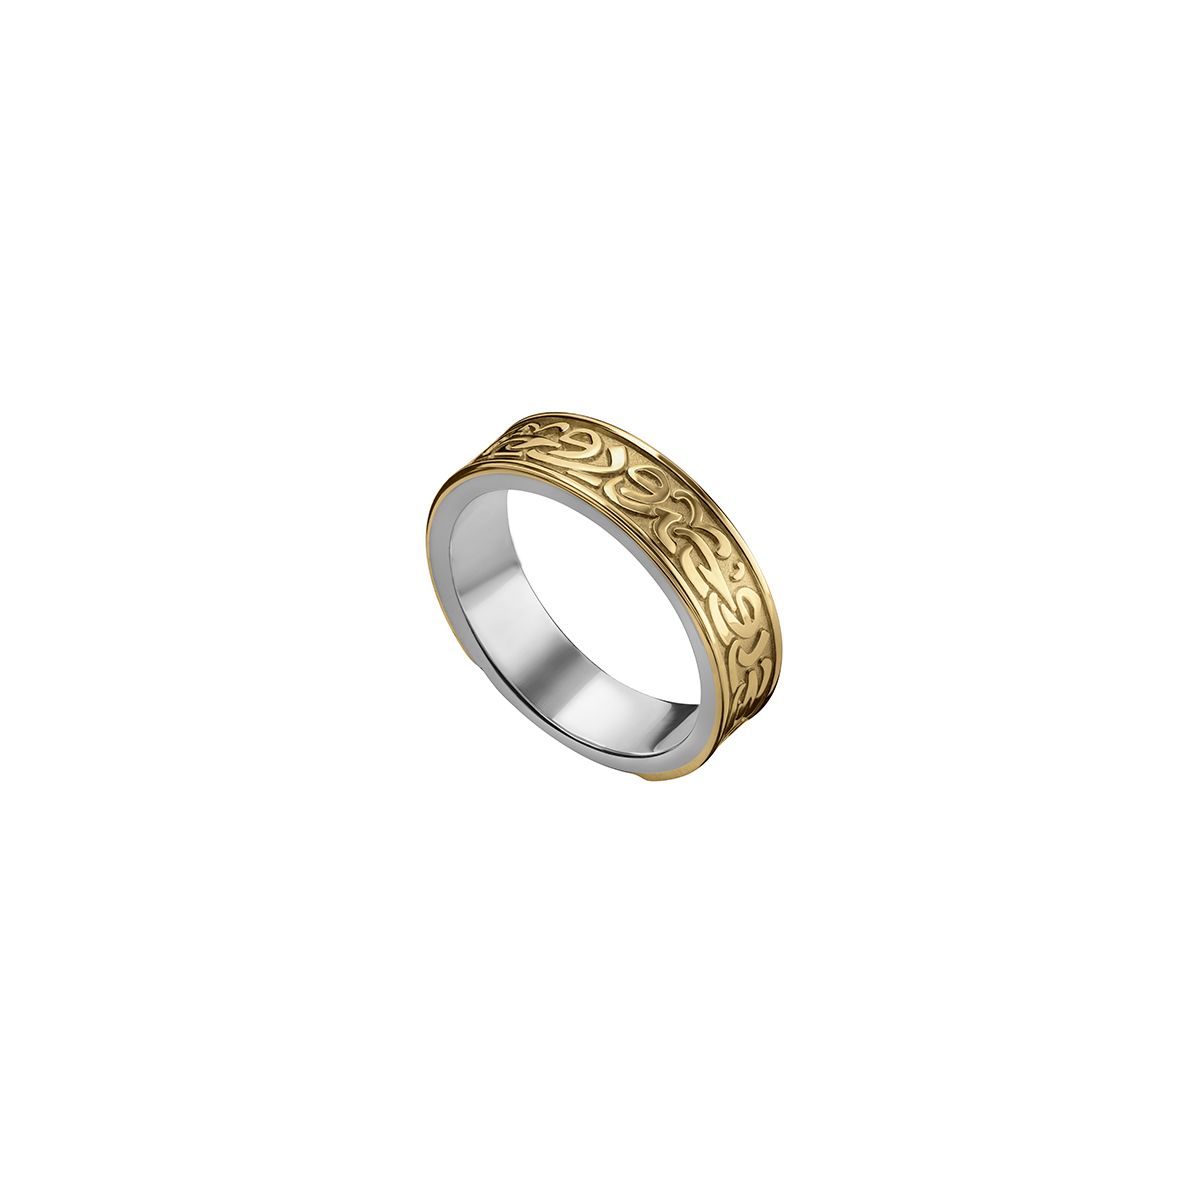 Silver/Gold Calligraphy Band by Azza Fahmy - Designer Rings